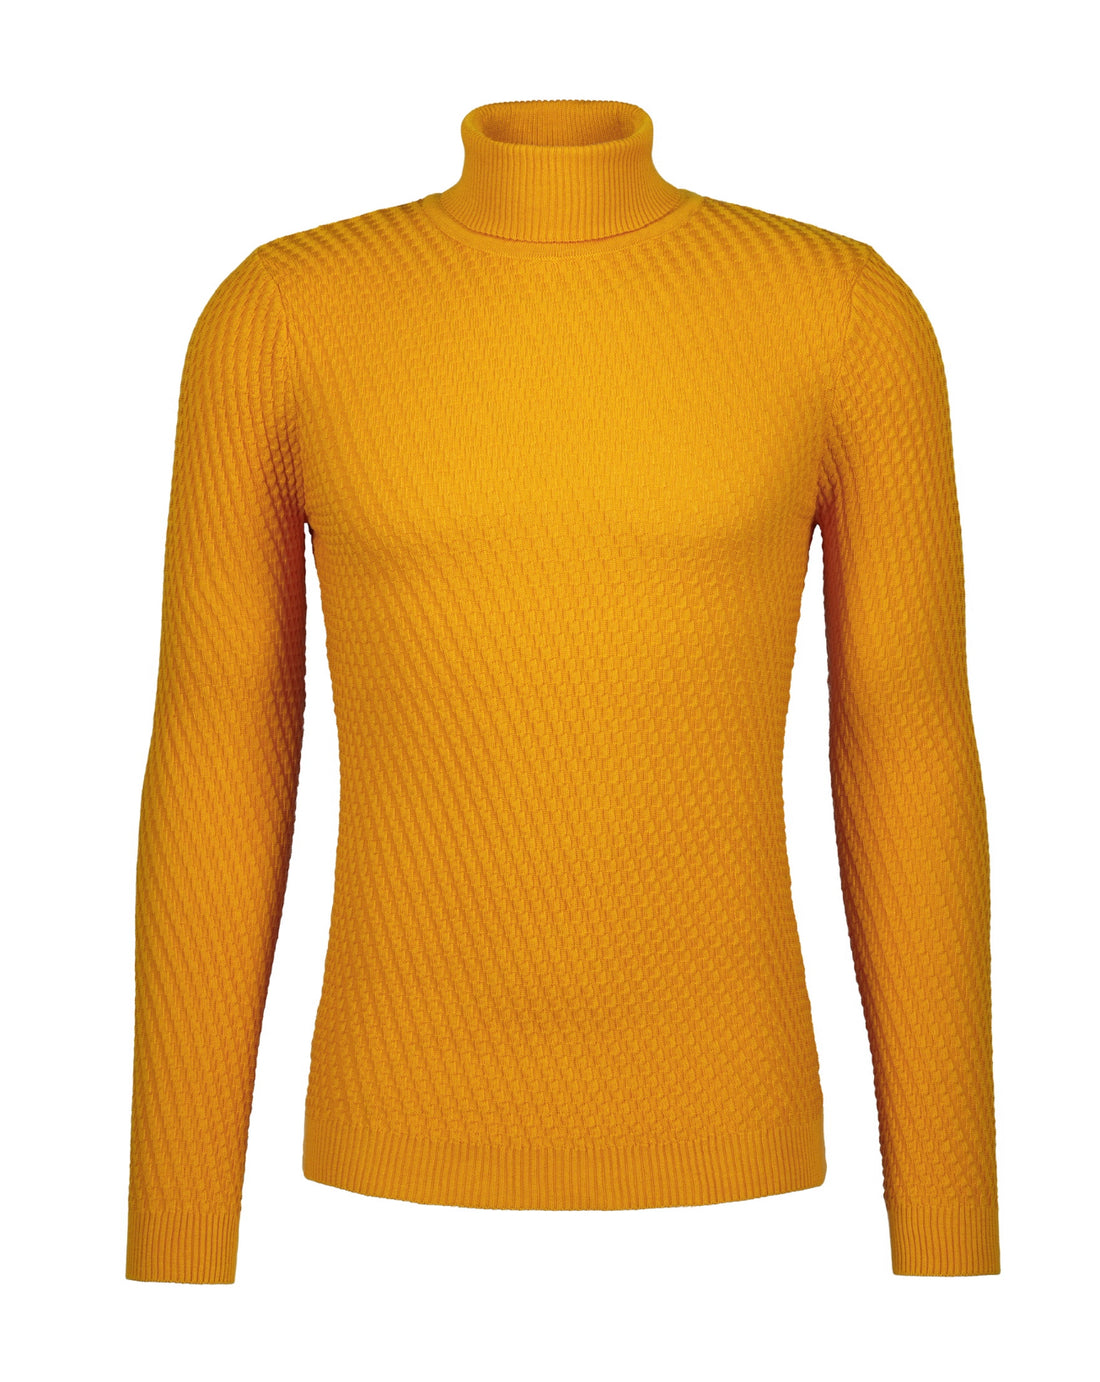 Textured Knit Turtleneck Sweater -  Yellow Gold - Sweater by Urbbana